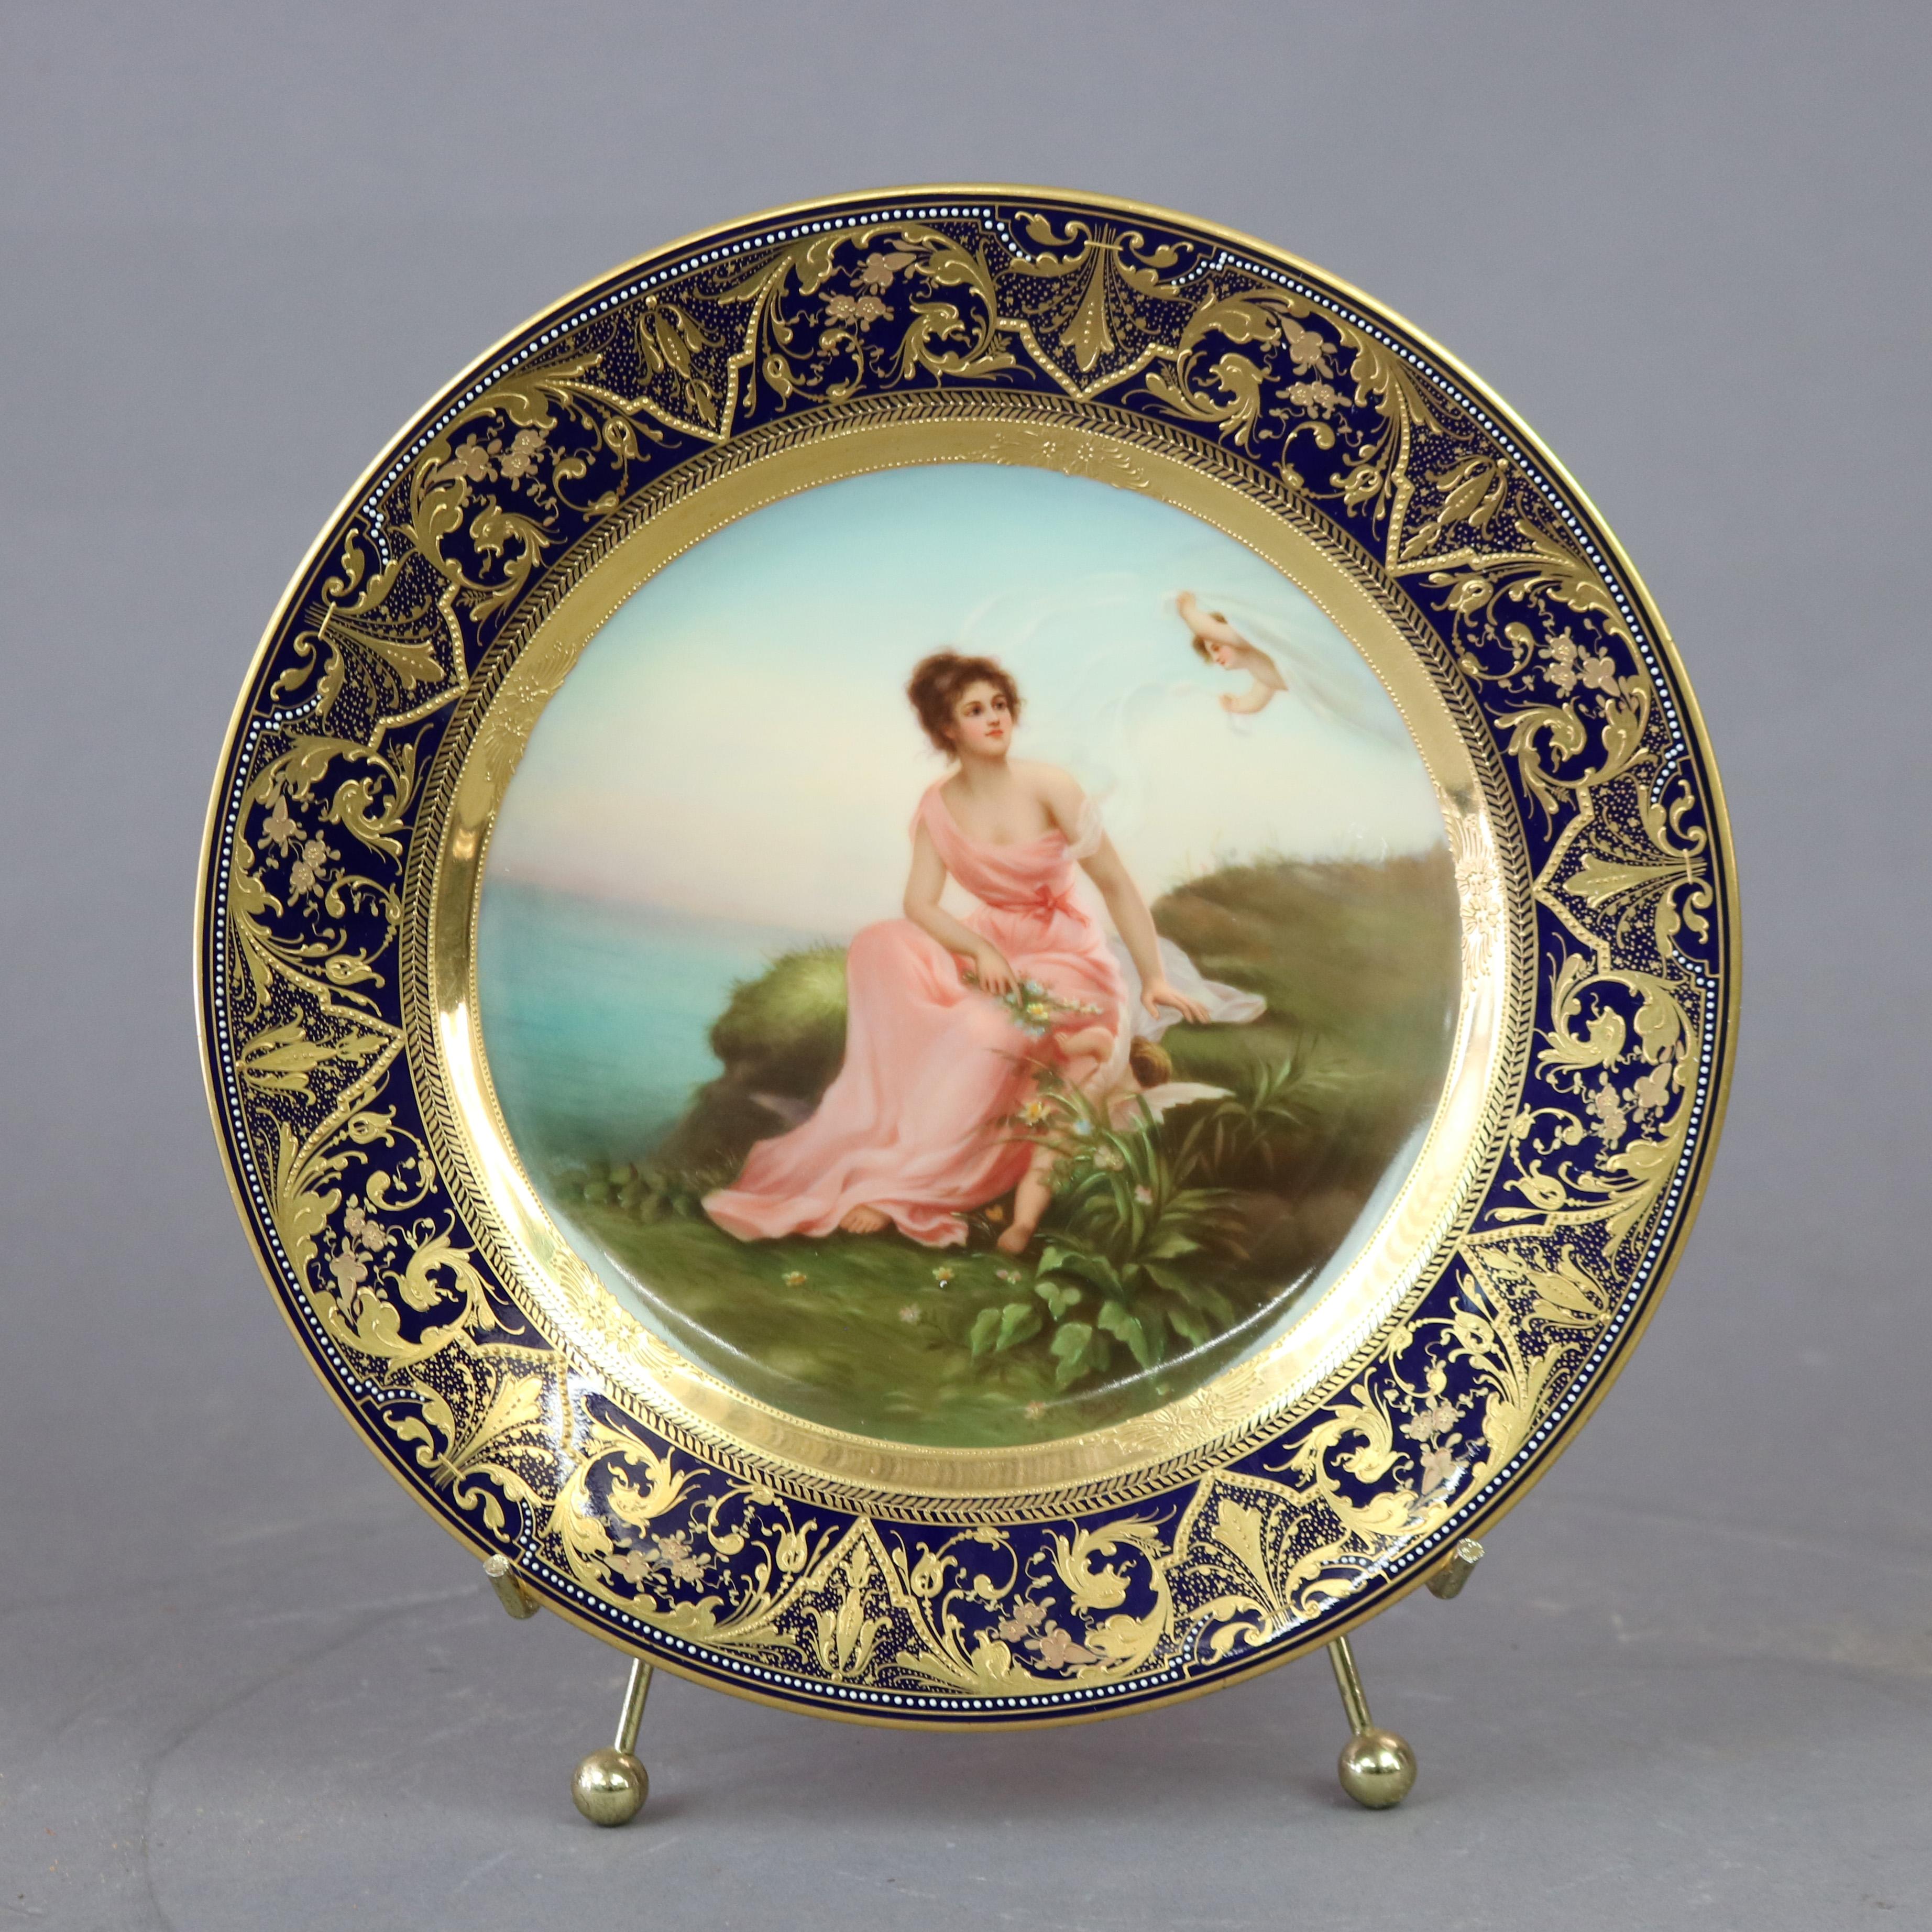 An antique Austrian plate by Royal Vienna titled 